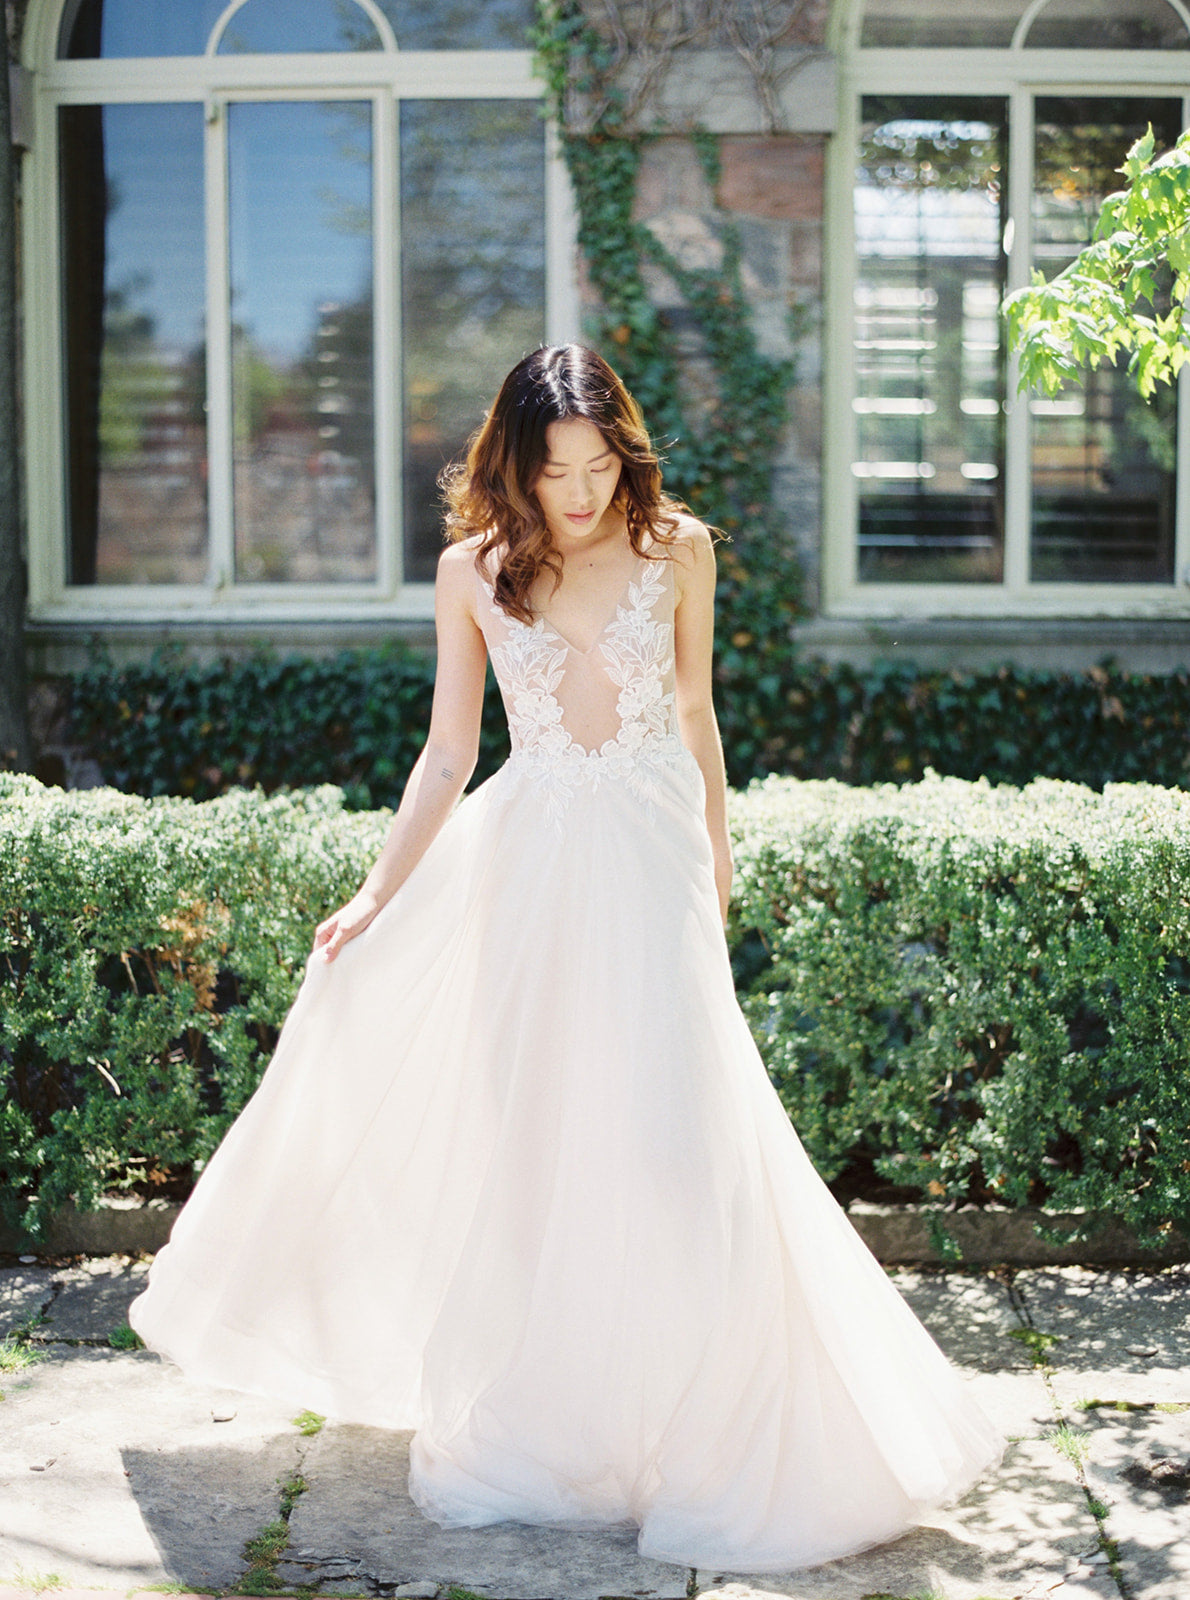 AMY | Floral Wedding Dress with Soft Tulle Skirt | Noon on the Moon